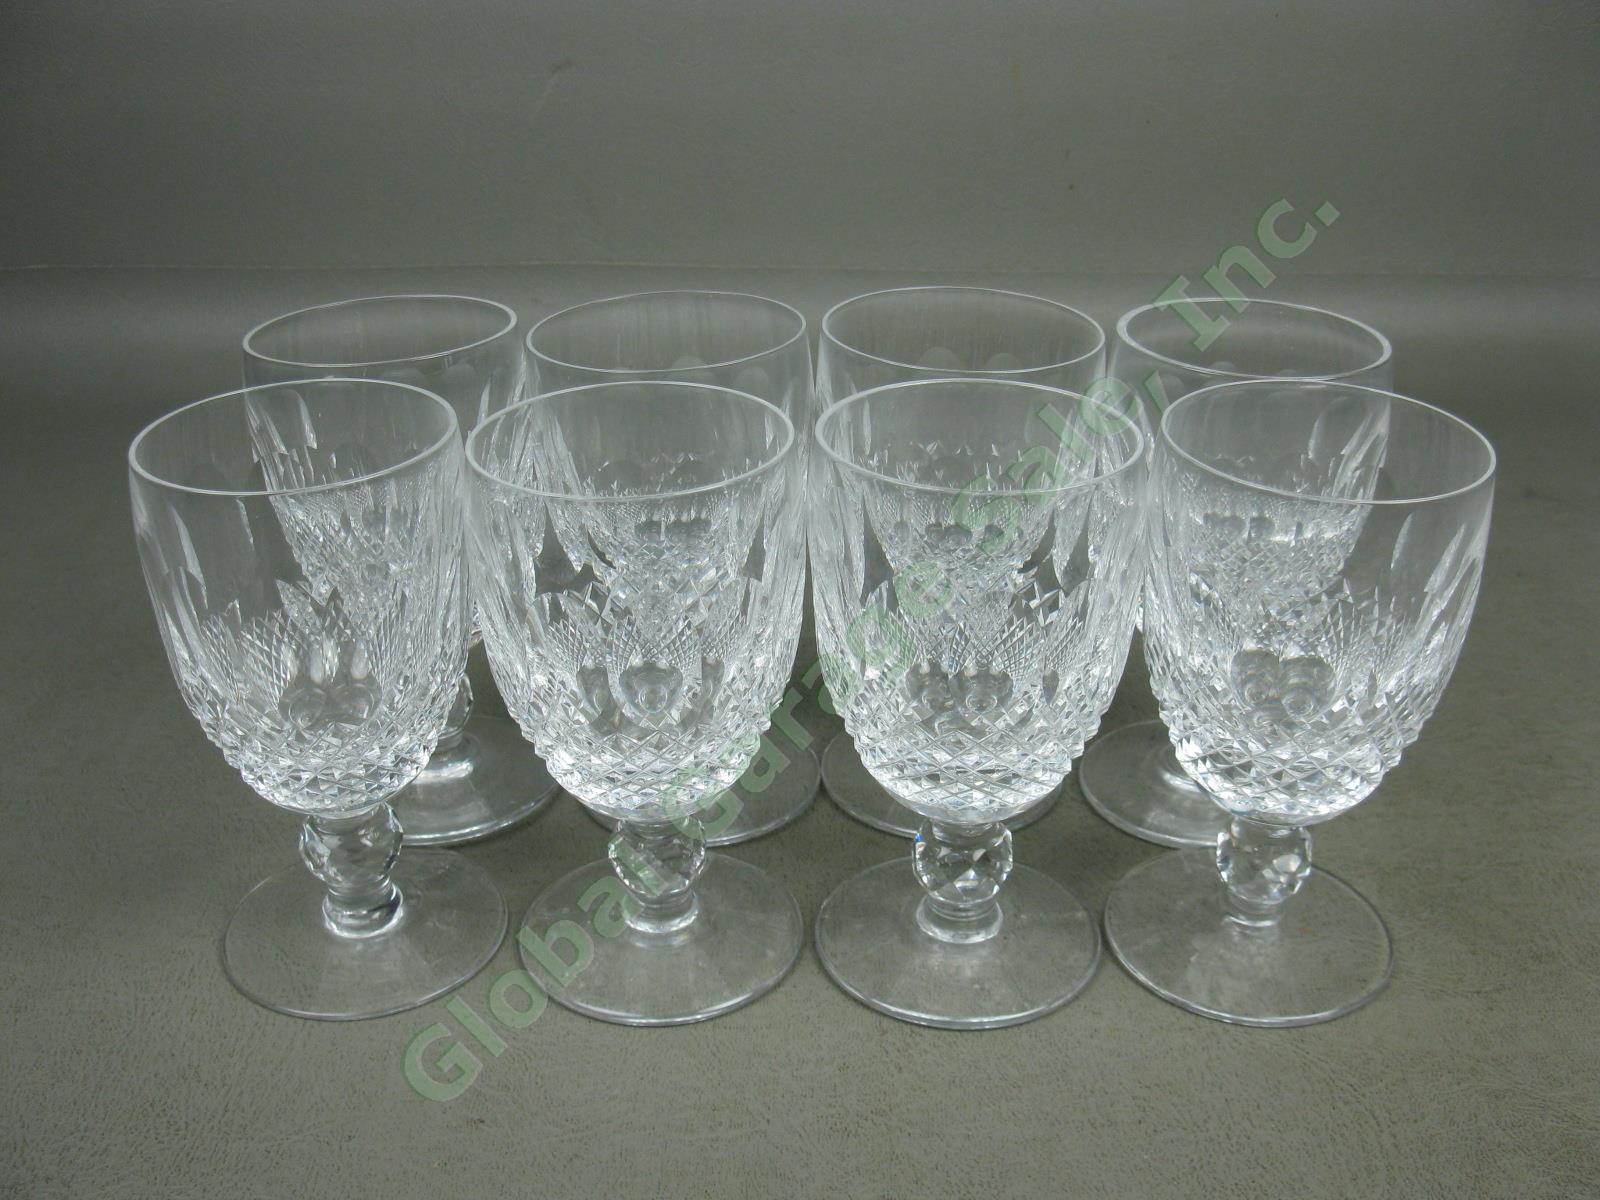 8 Waterford Cut Lead Crystal Colleen Claret Red Wine Glasses Set Lot 4-3/4" Tall